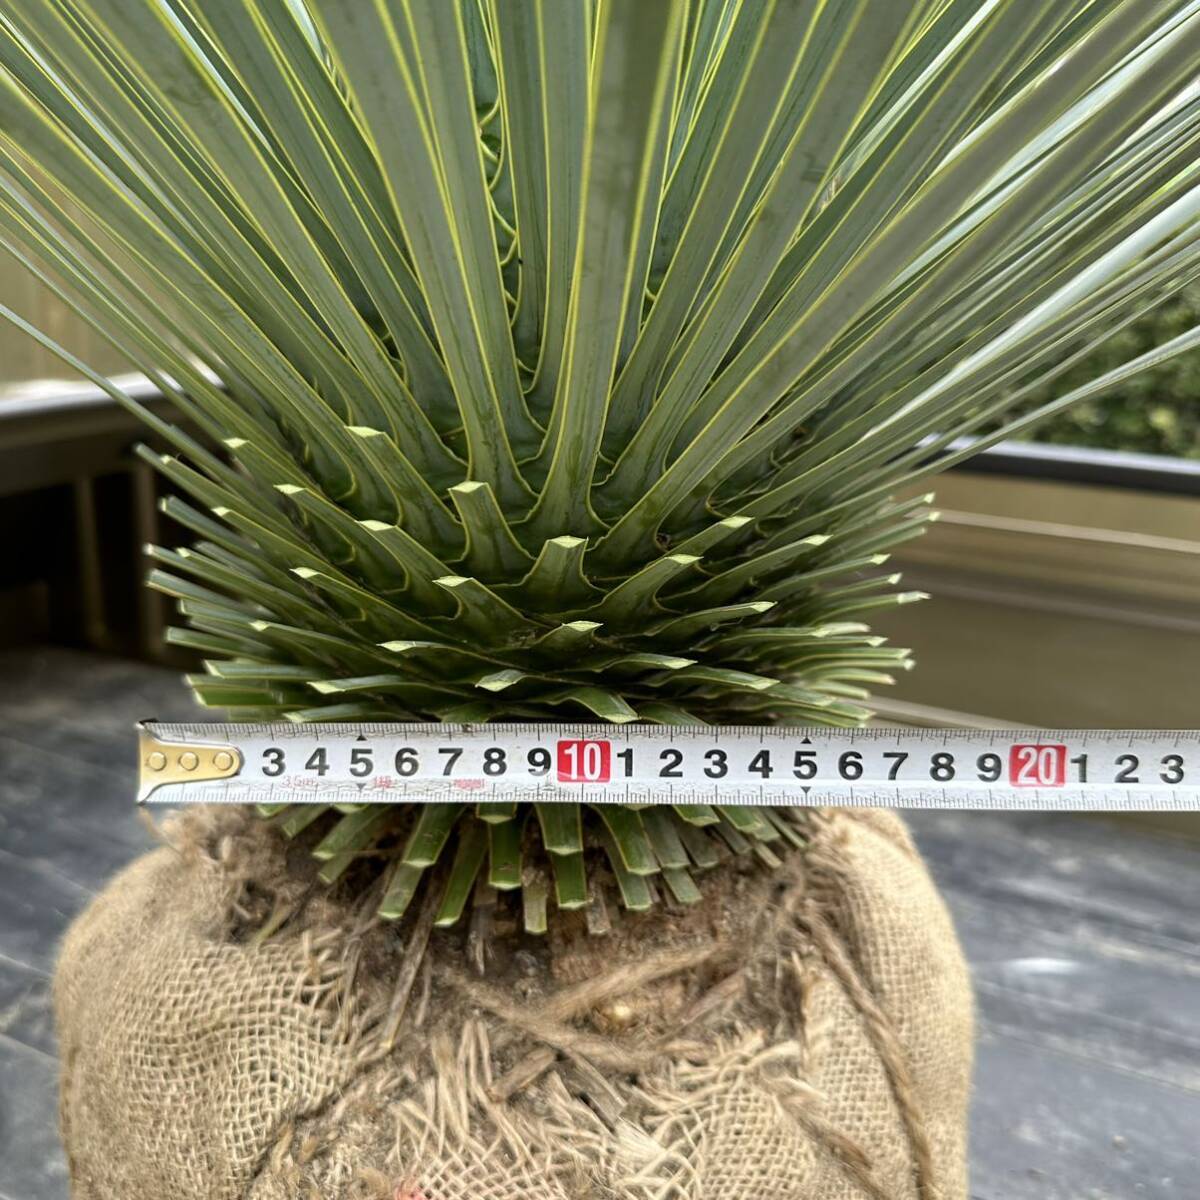  receipt limitation 0 yucca Lost la-ta0 [ height of tree : approximately 107.] Driger ten yucca here s cocos nucifera May12